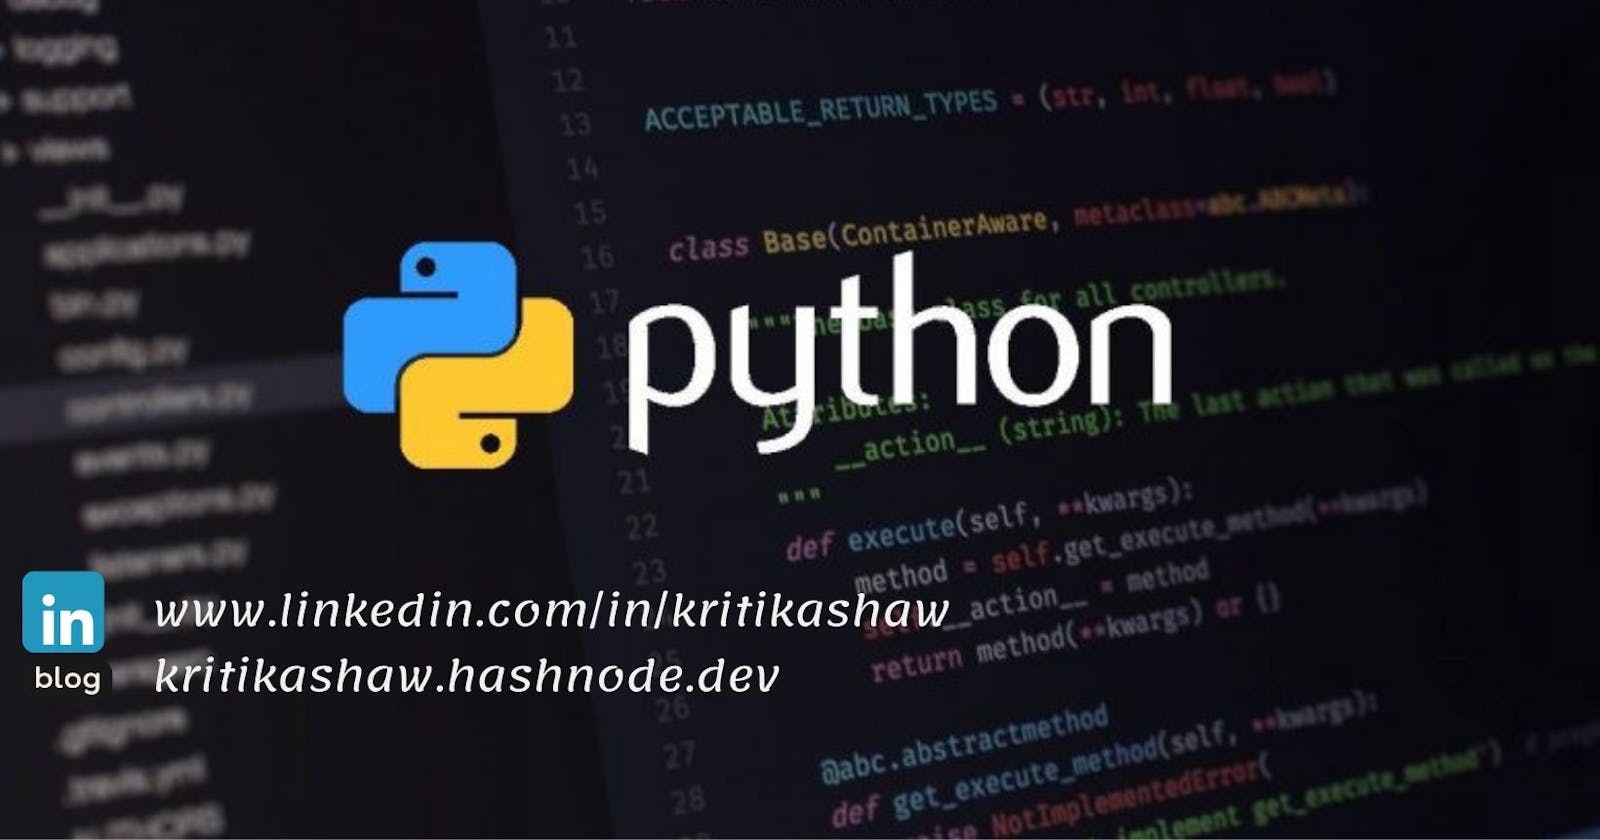 Let's get into Python